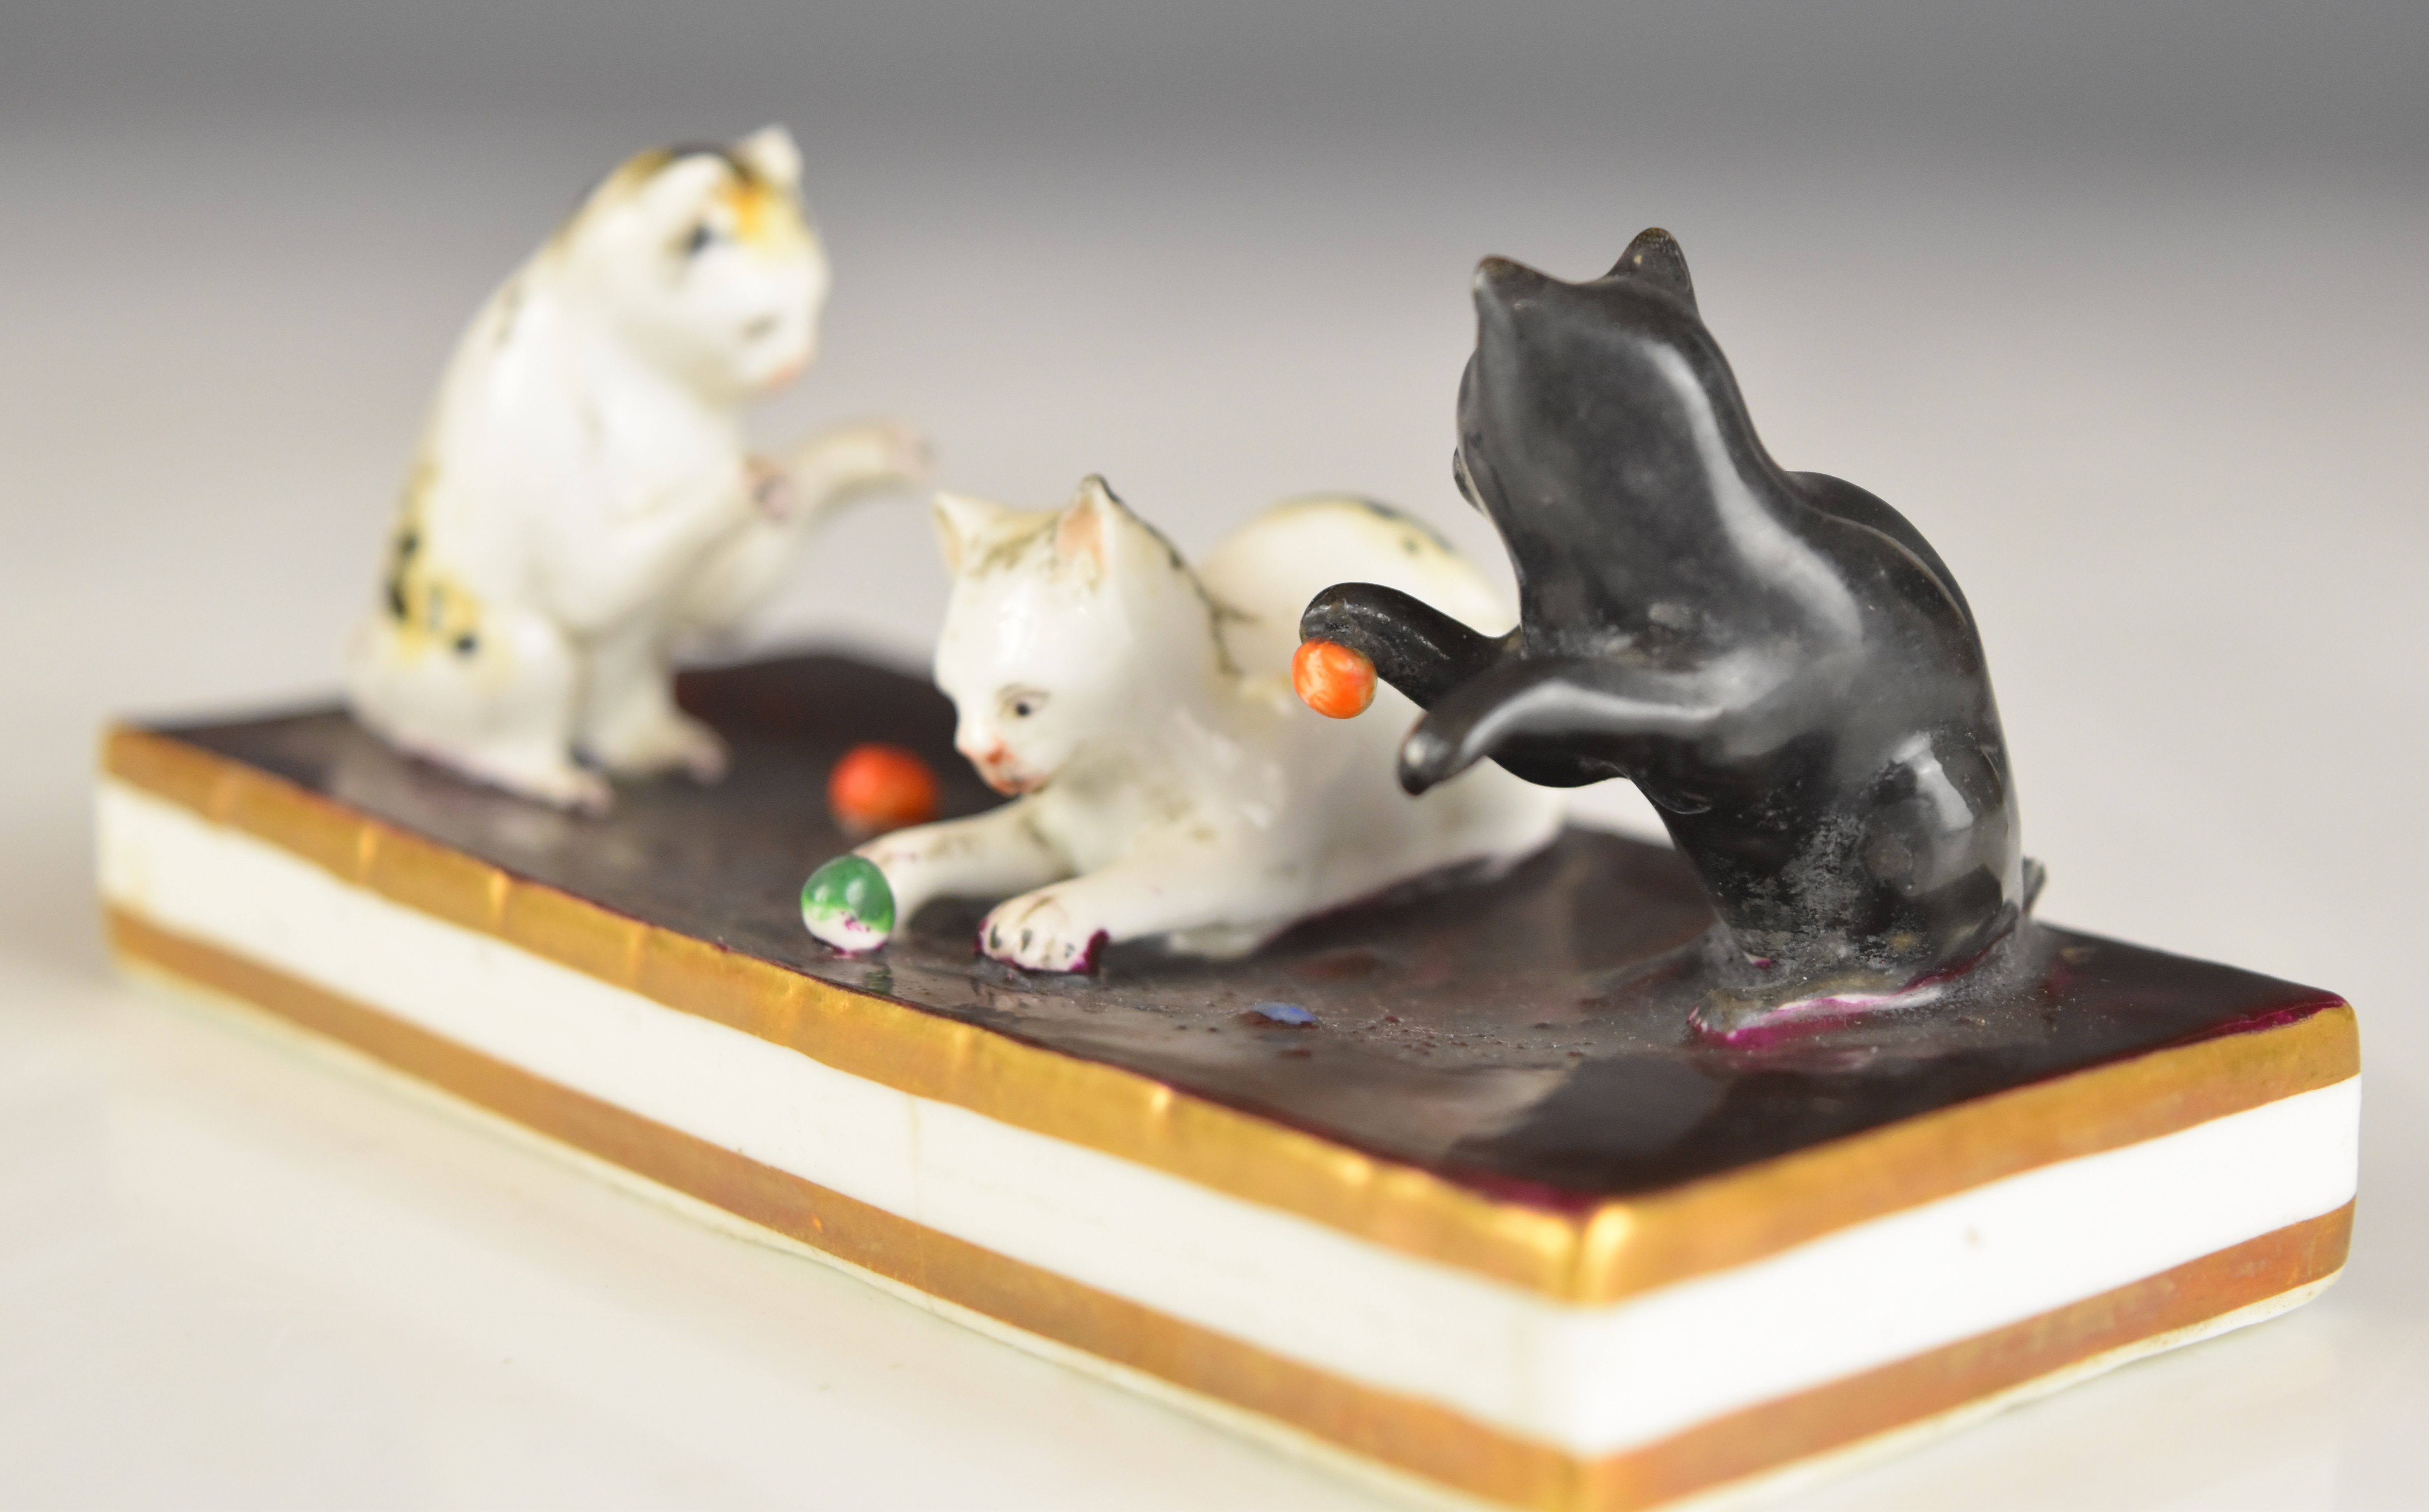 19thC novelty miniature porcelain tableau of three kittens playing, W10 x D4.5 x H4.5cm - Image 7 of 8